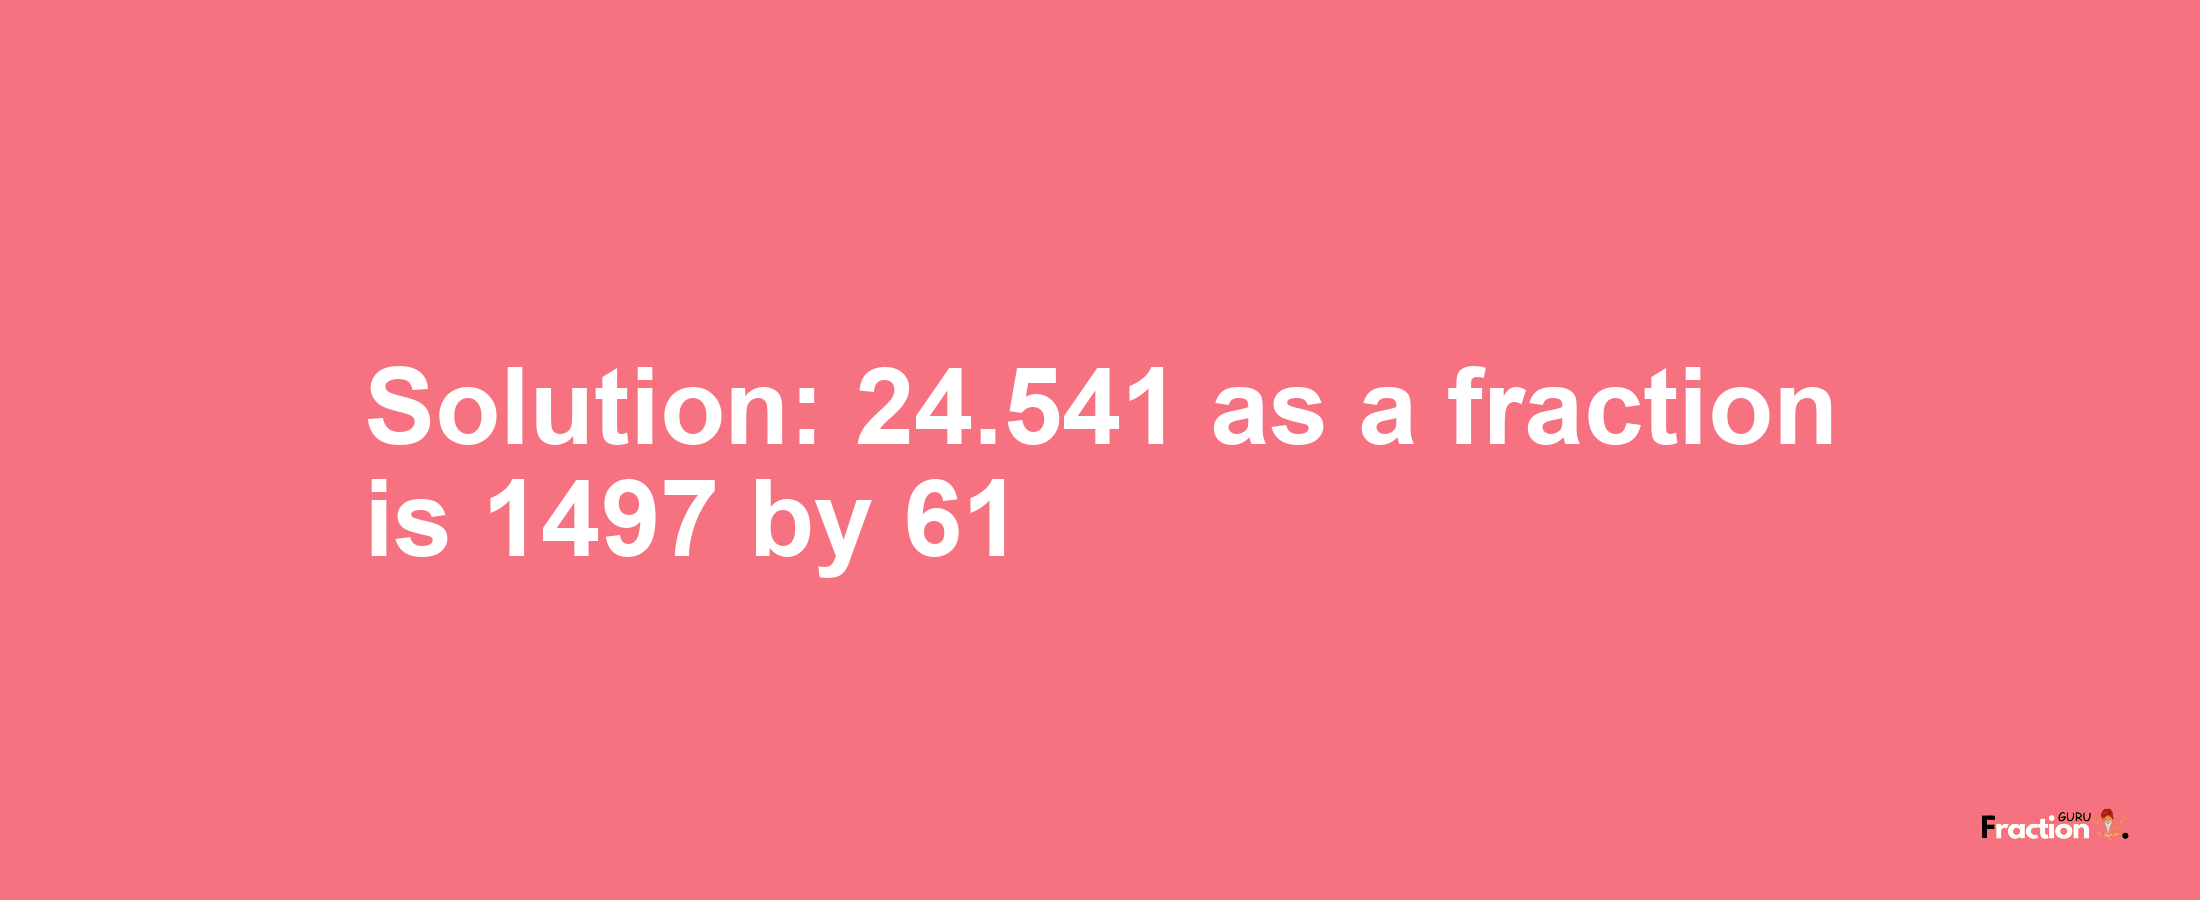 Solution:24.541 as a fraction is 1497/61